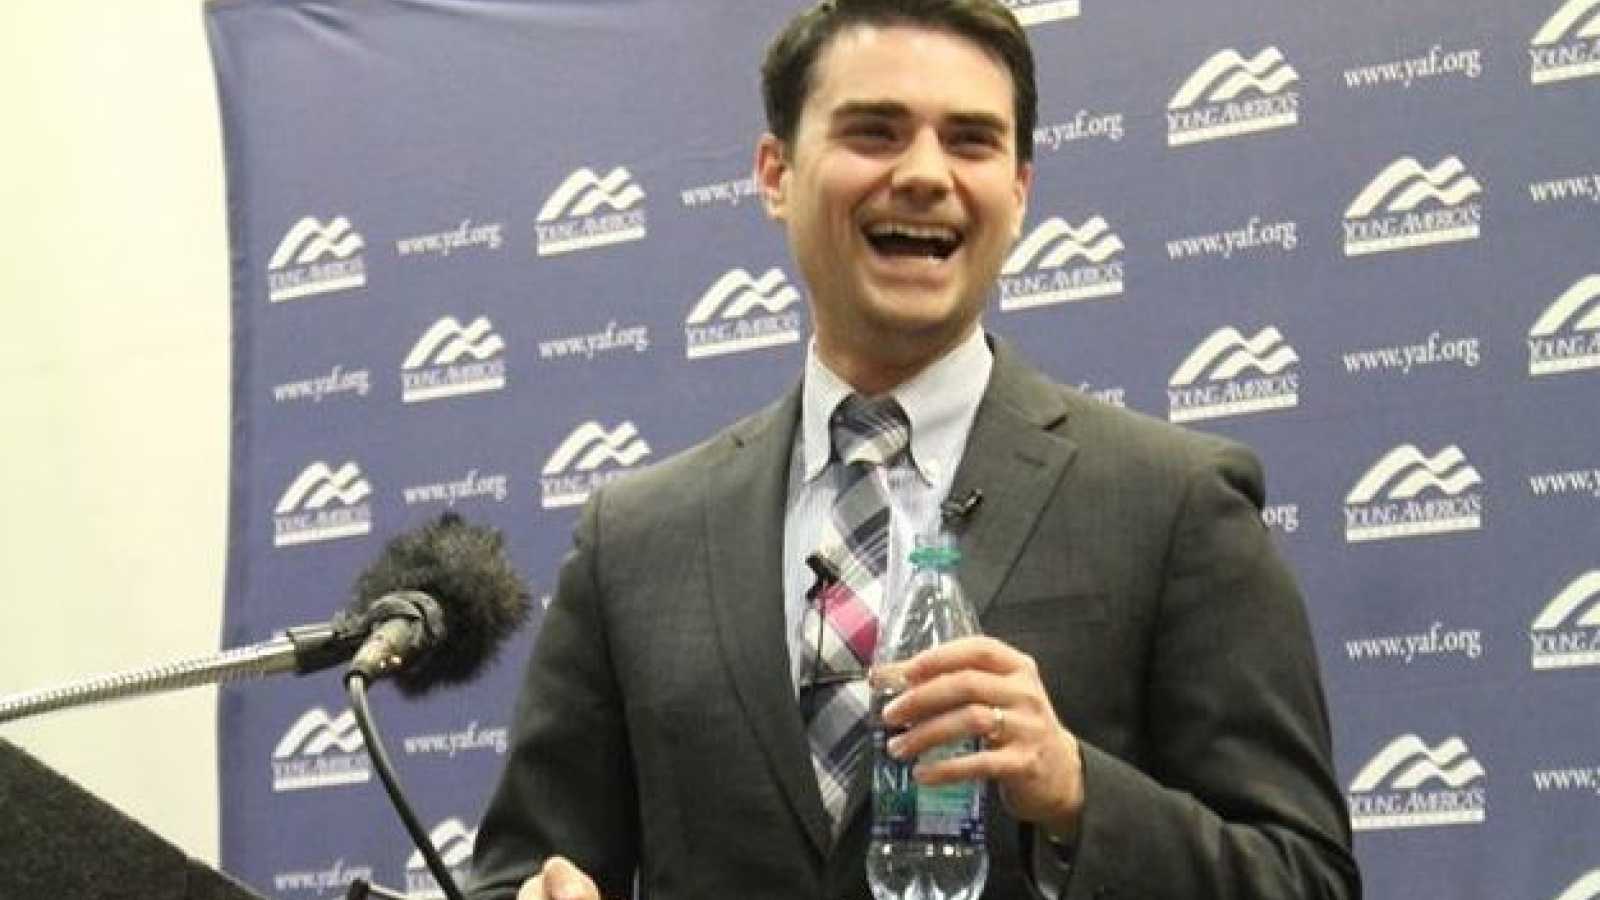 The death of free speech: Conservative commentator Ben Shapiro BANNED from DePaul University